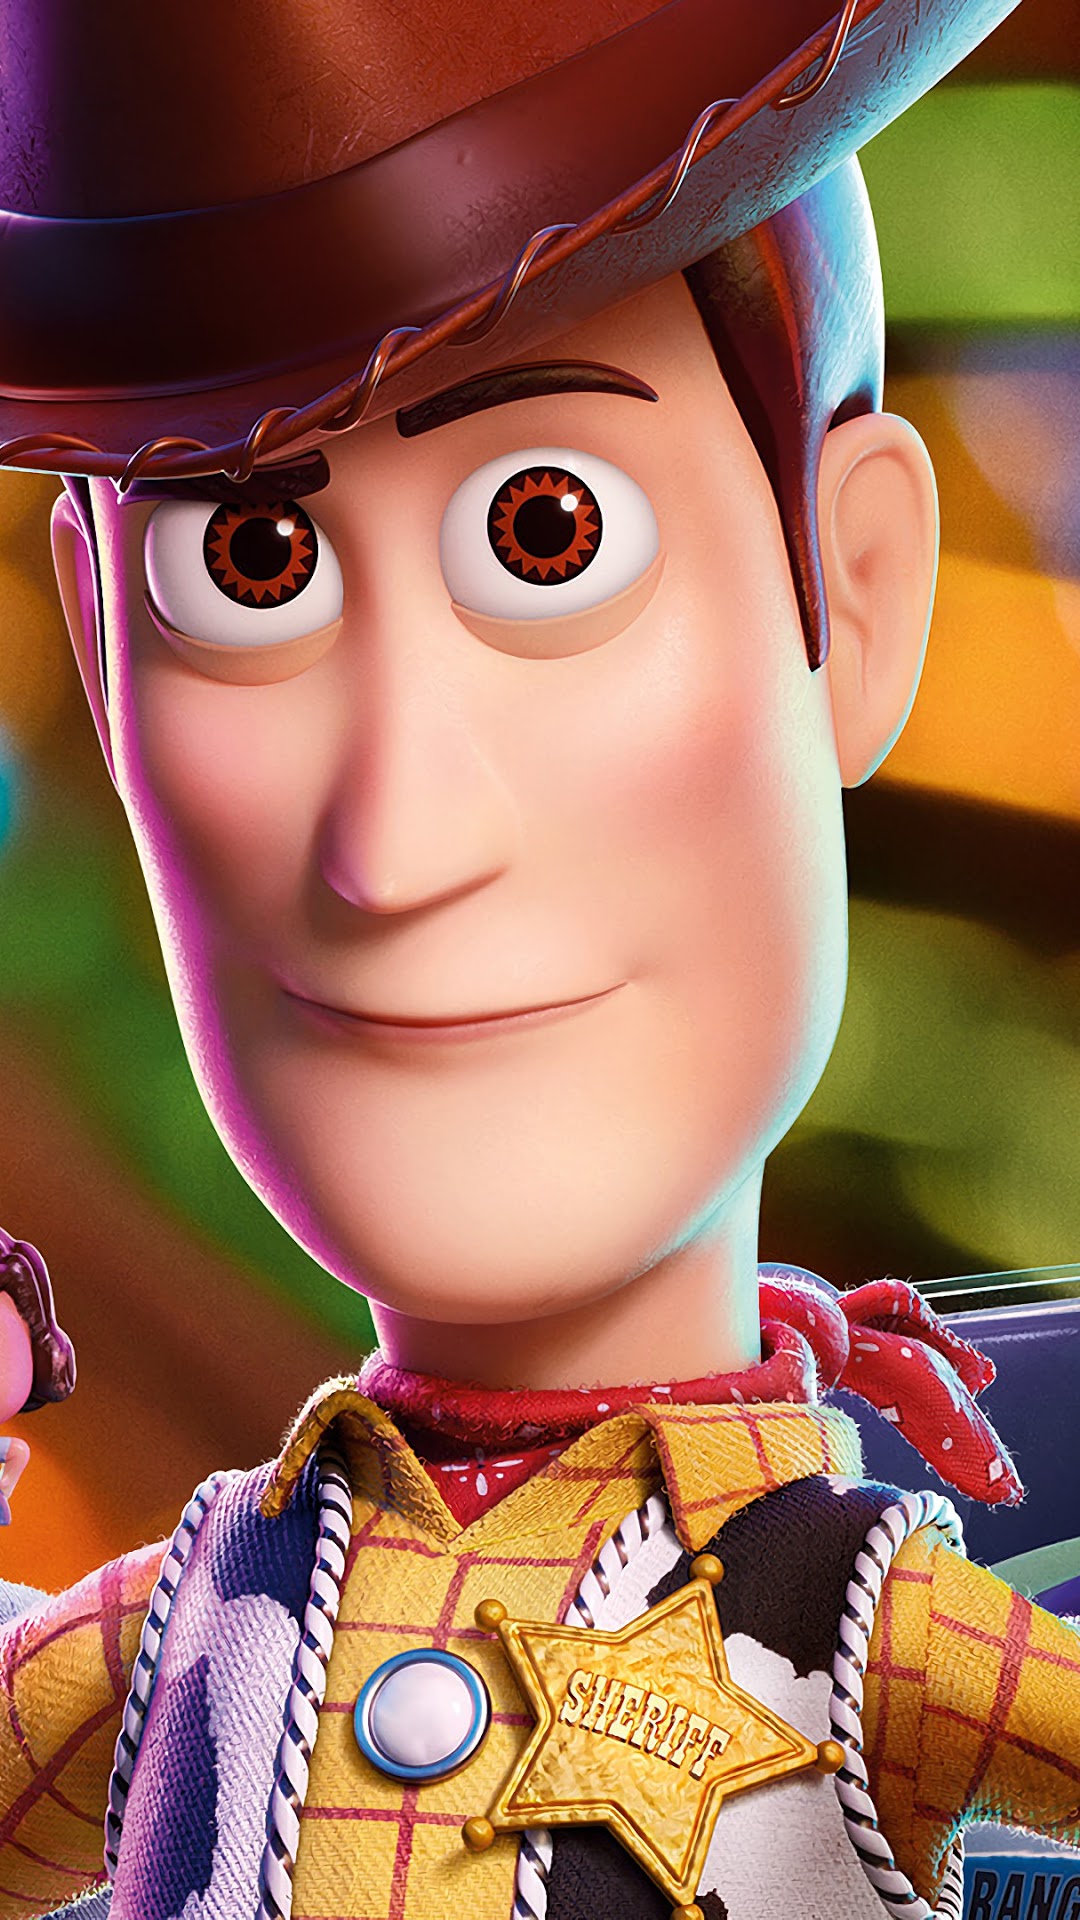 Toy Story Woody and Buzz Lightyear phone HD Wallpaper, Image, Background, Photo and Picture HD Wallpaper